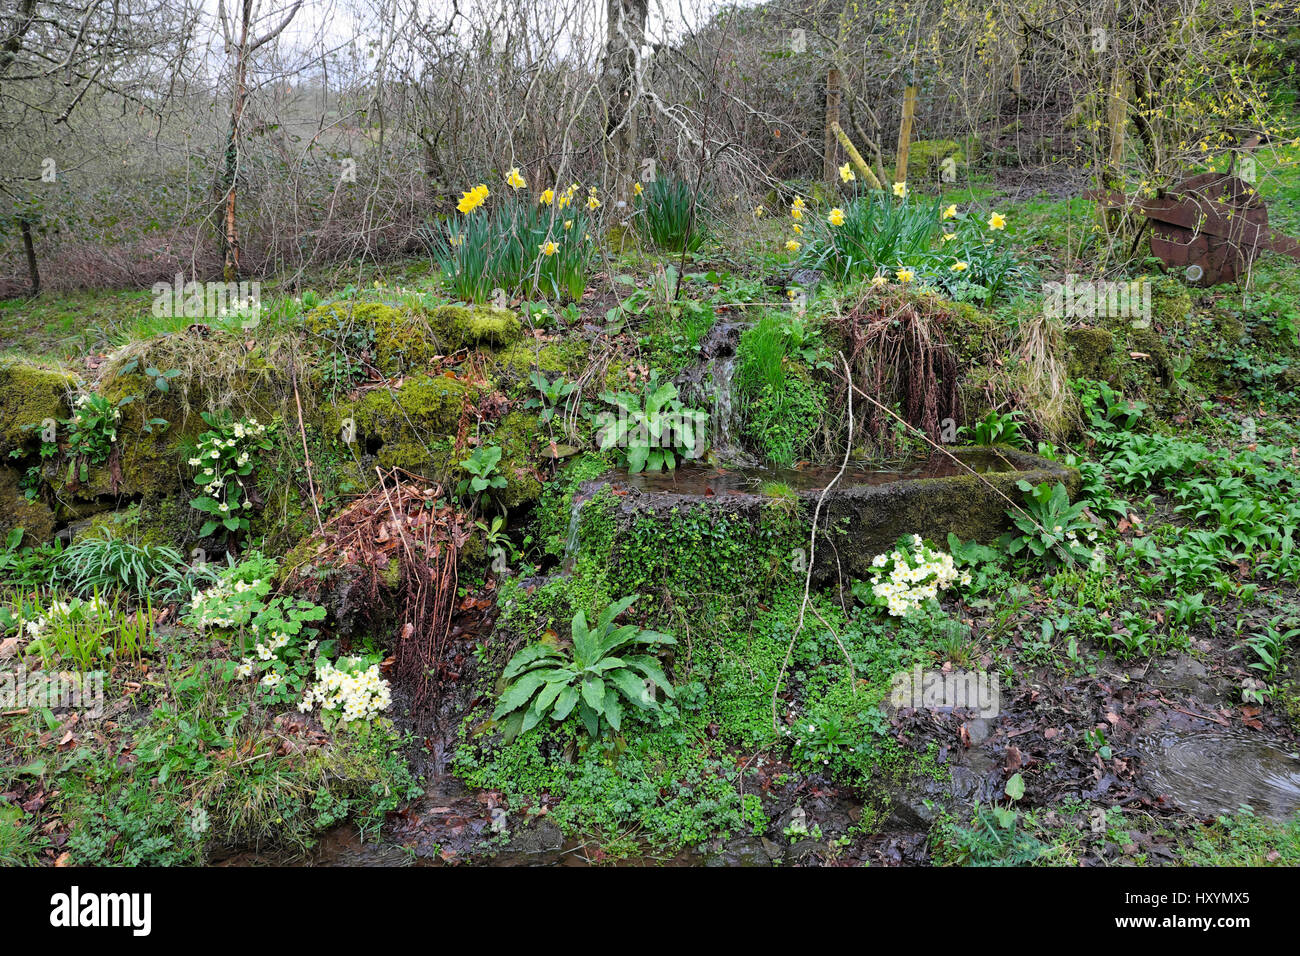 Rock garden in spring with water trough, ferns, polyanthus, daffodils in  Carmarthenshire Wales UK  KATHY DEWITT Stock Photo